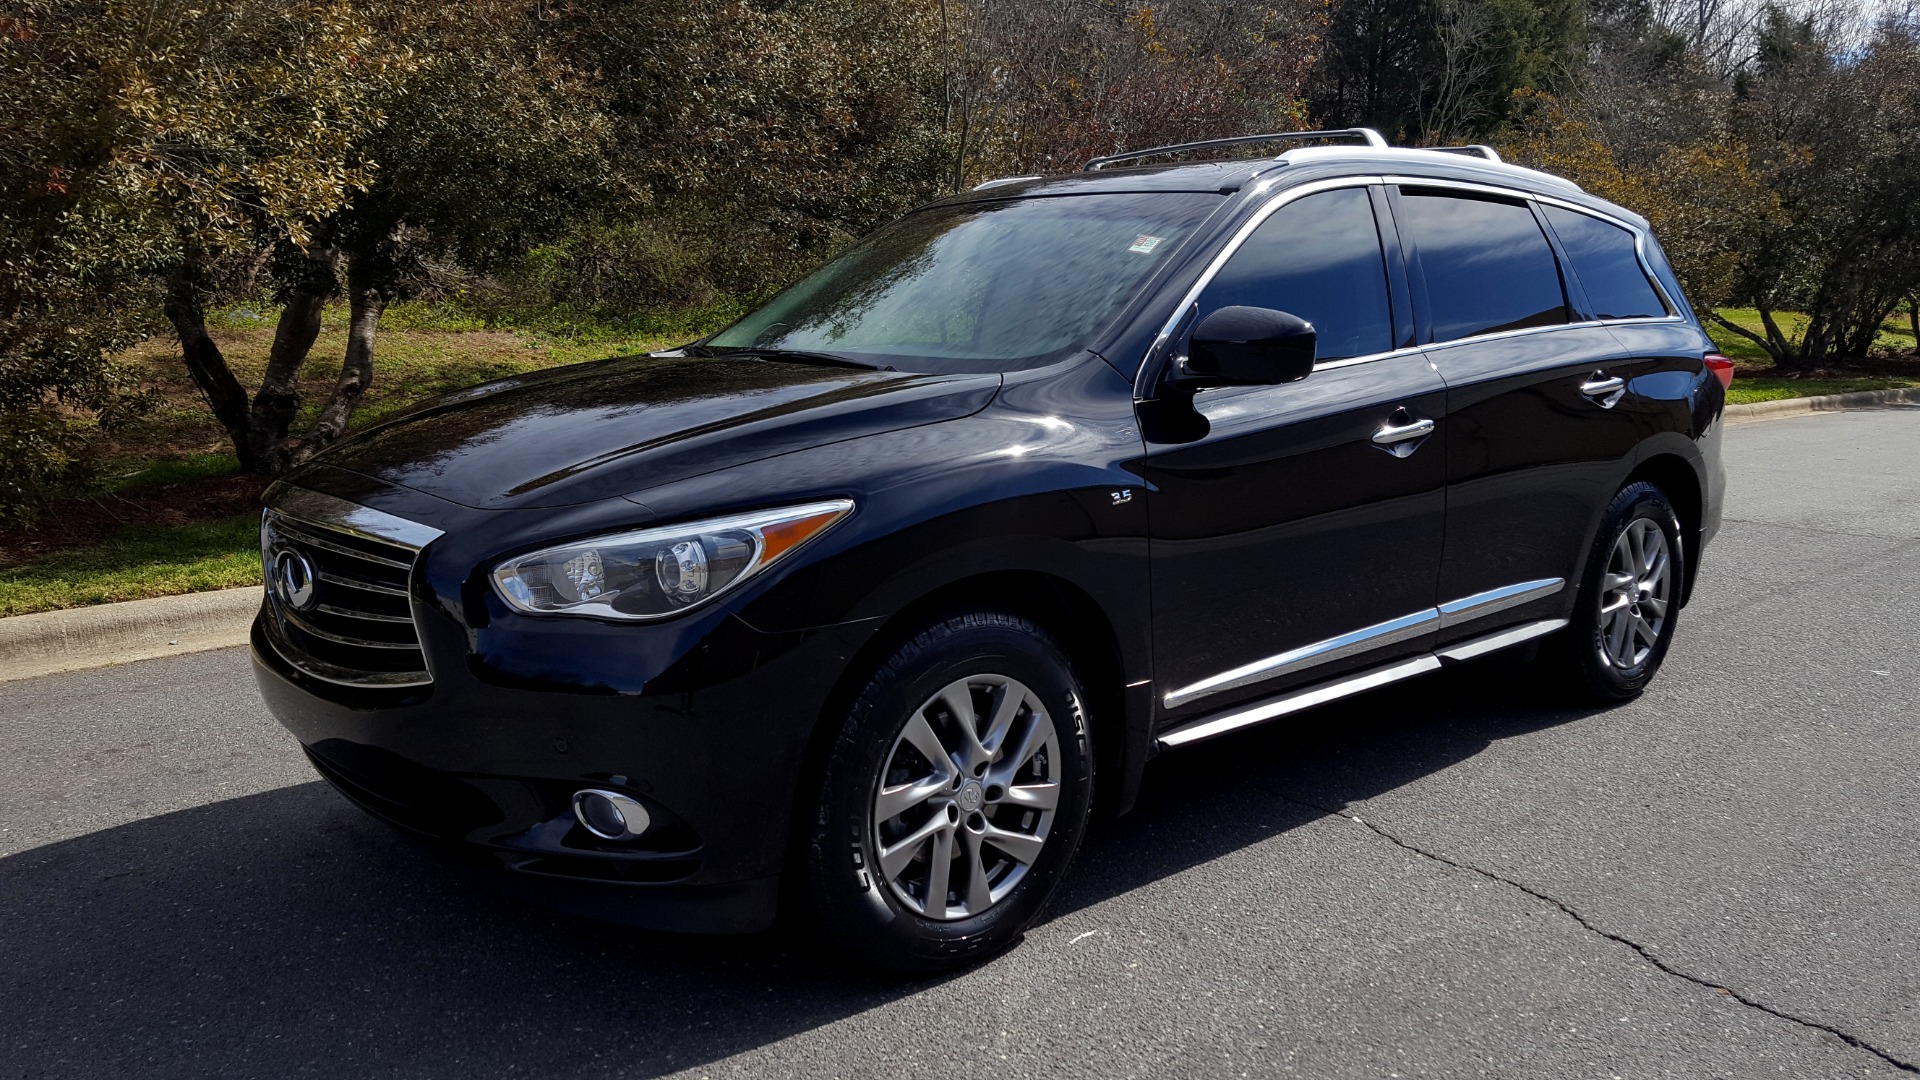 Used 2015 INFINITI QX60 AWD / PREMIUM PLUS PKG / NAV / SUNROOF / BOSE / 3-ROW / DVD for sale Sold at Formula Imports in Charlotte NC 28227 1